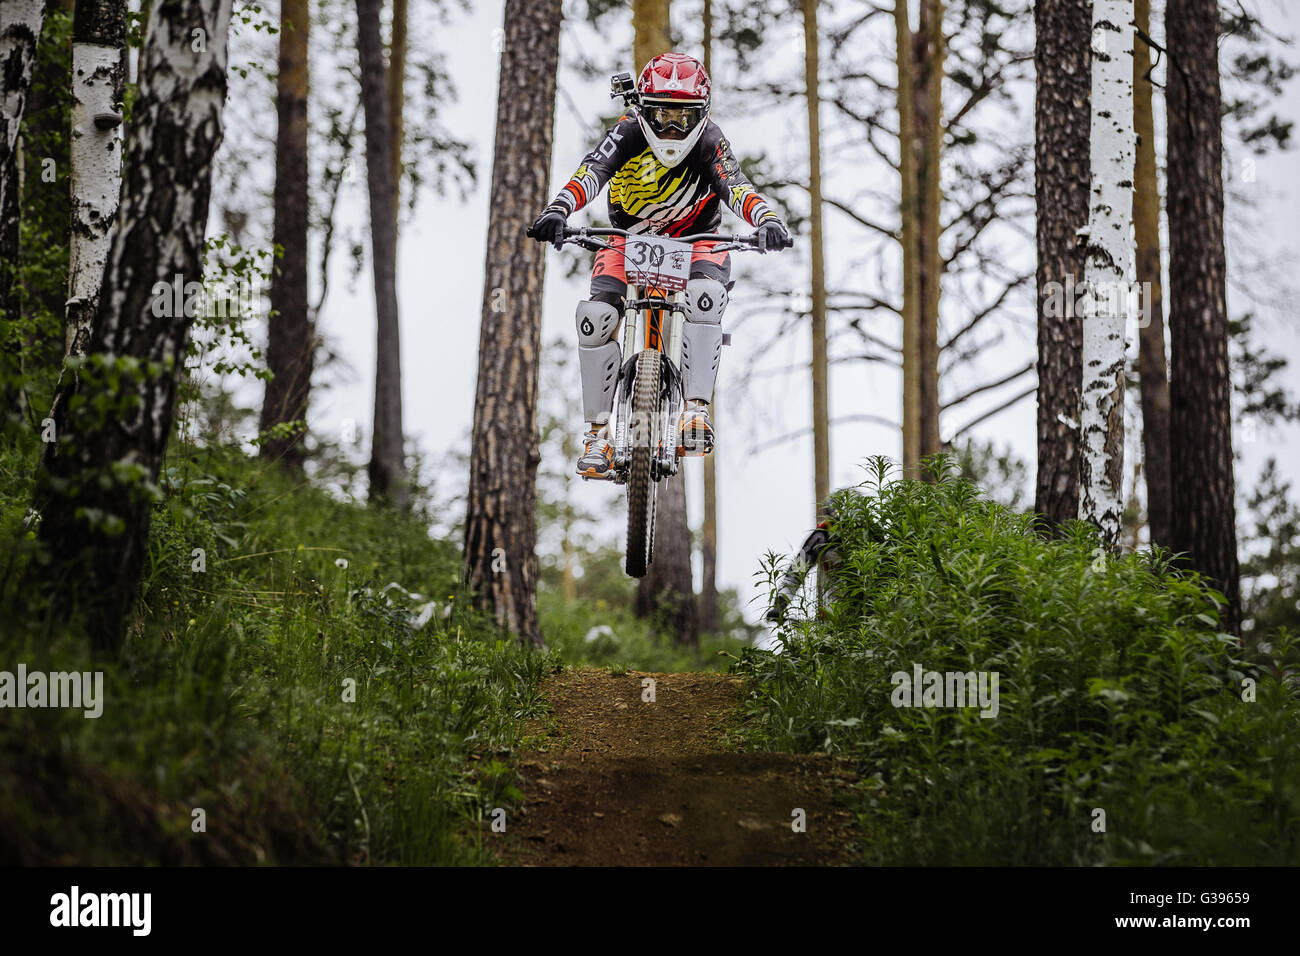 athlete racer bike jump with a mountain in forest on helmet video camera during Cup 'Ryder' downhill Stock Photo